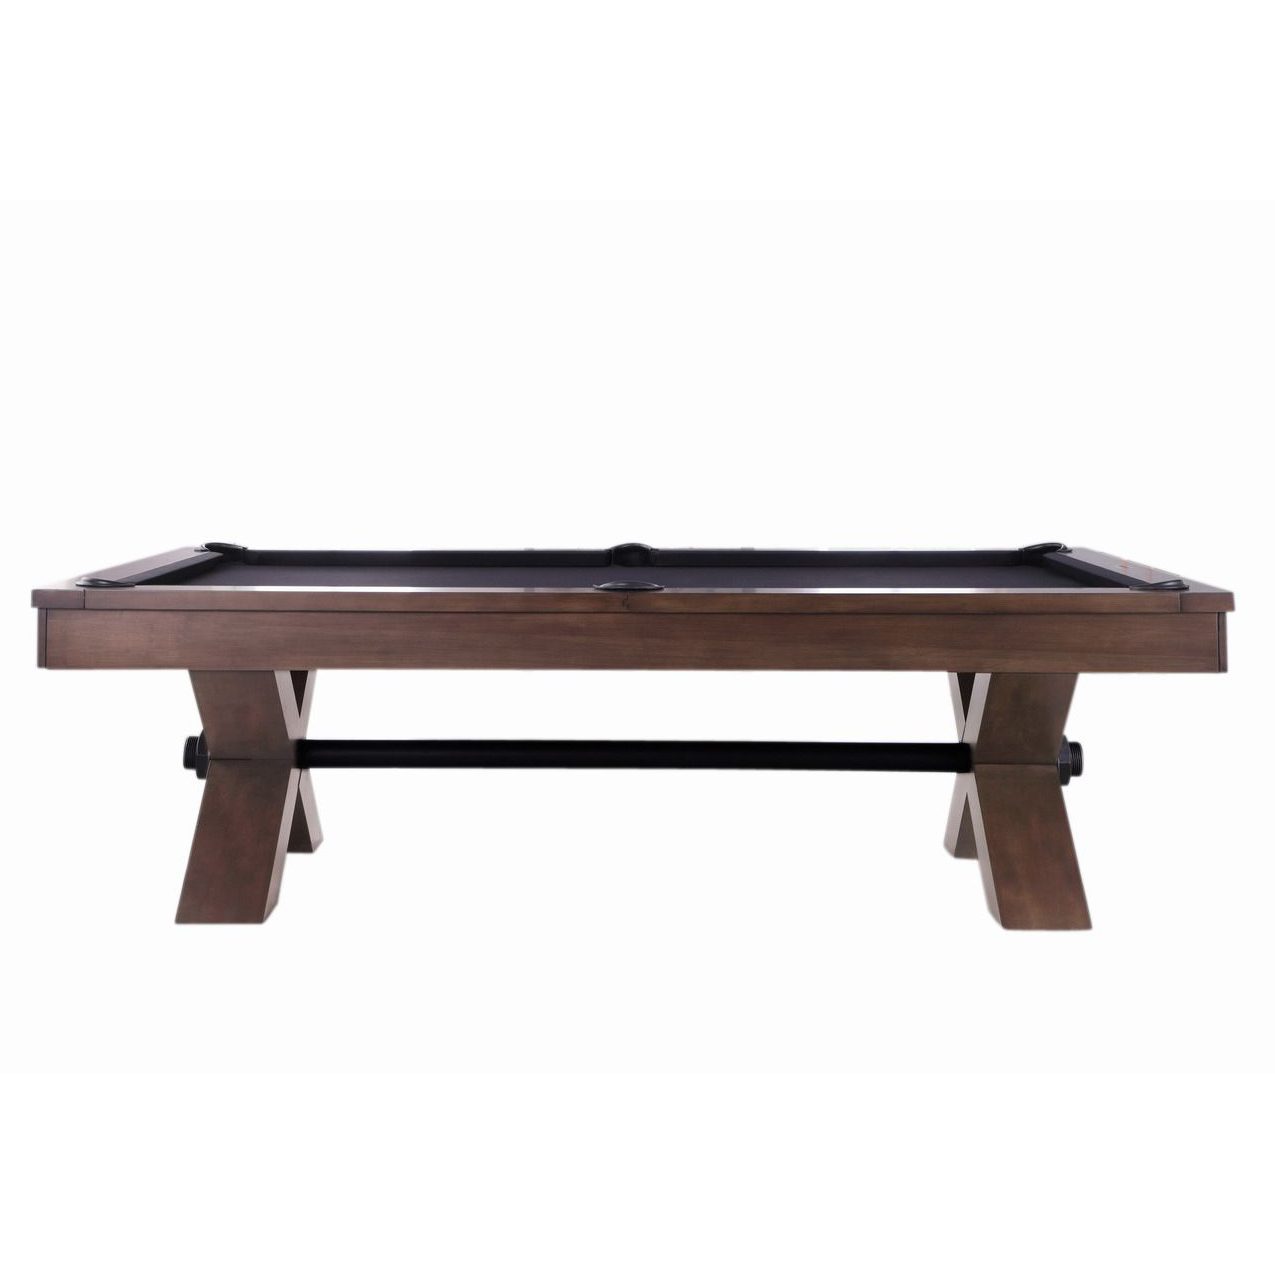 Plank and Hide Vox Wood Pool Table Gray Walnut Finish Long Side View